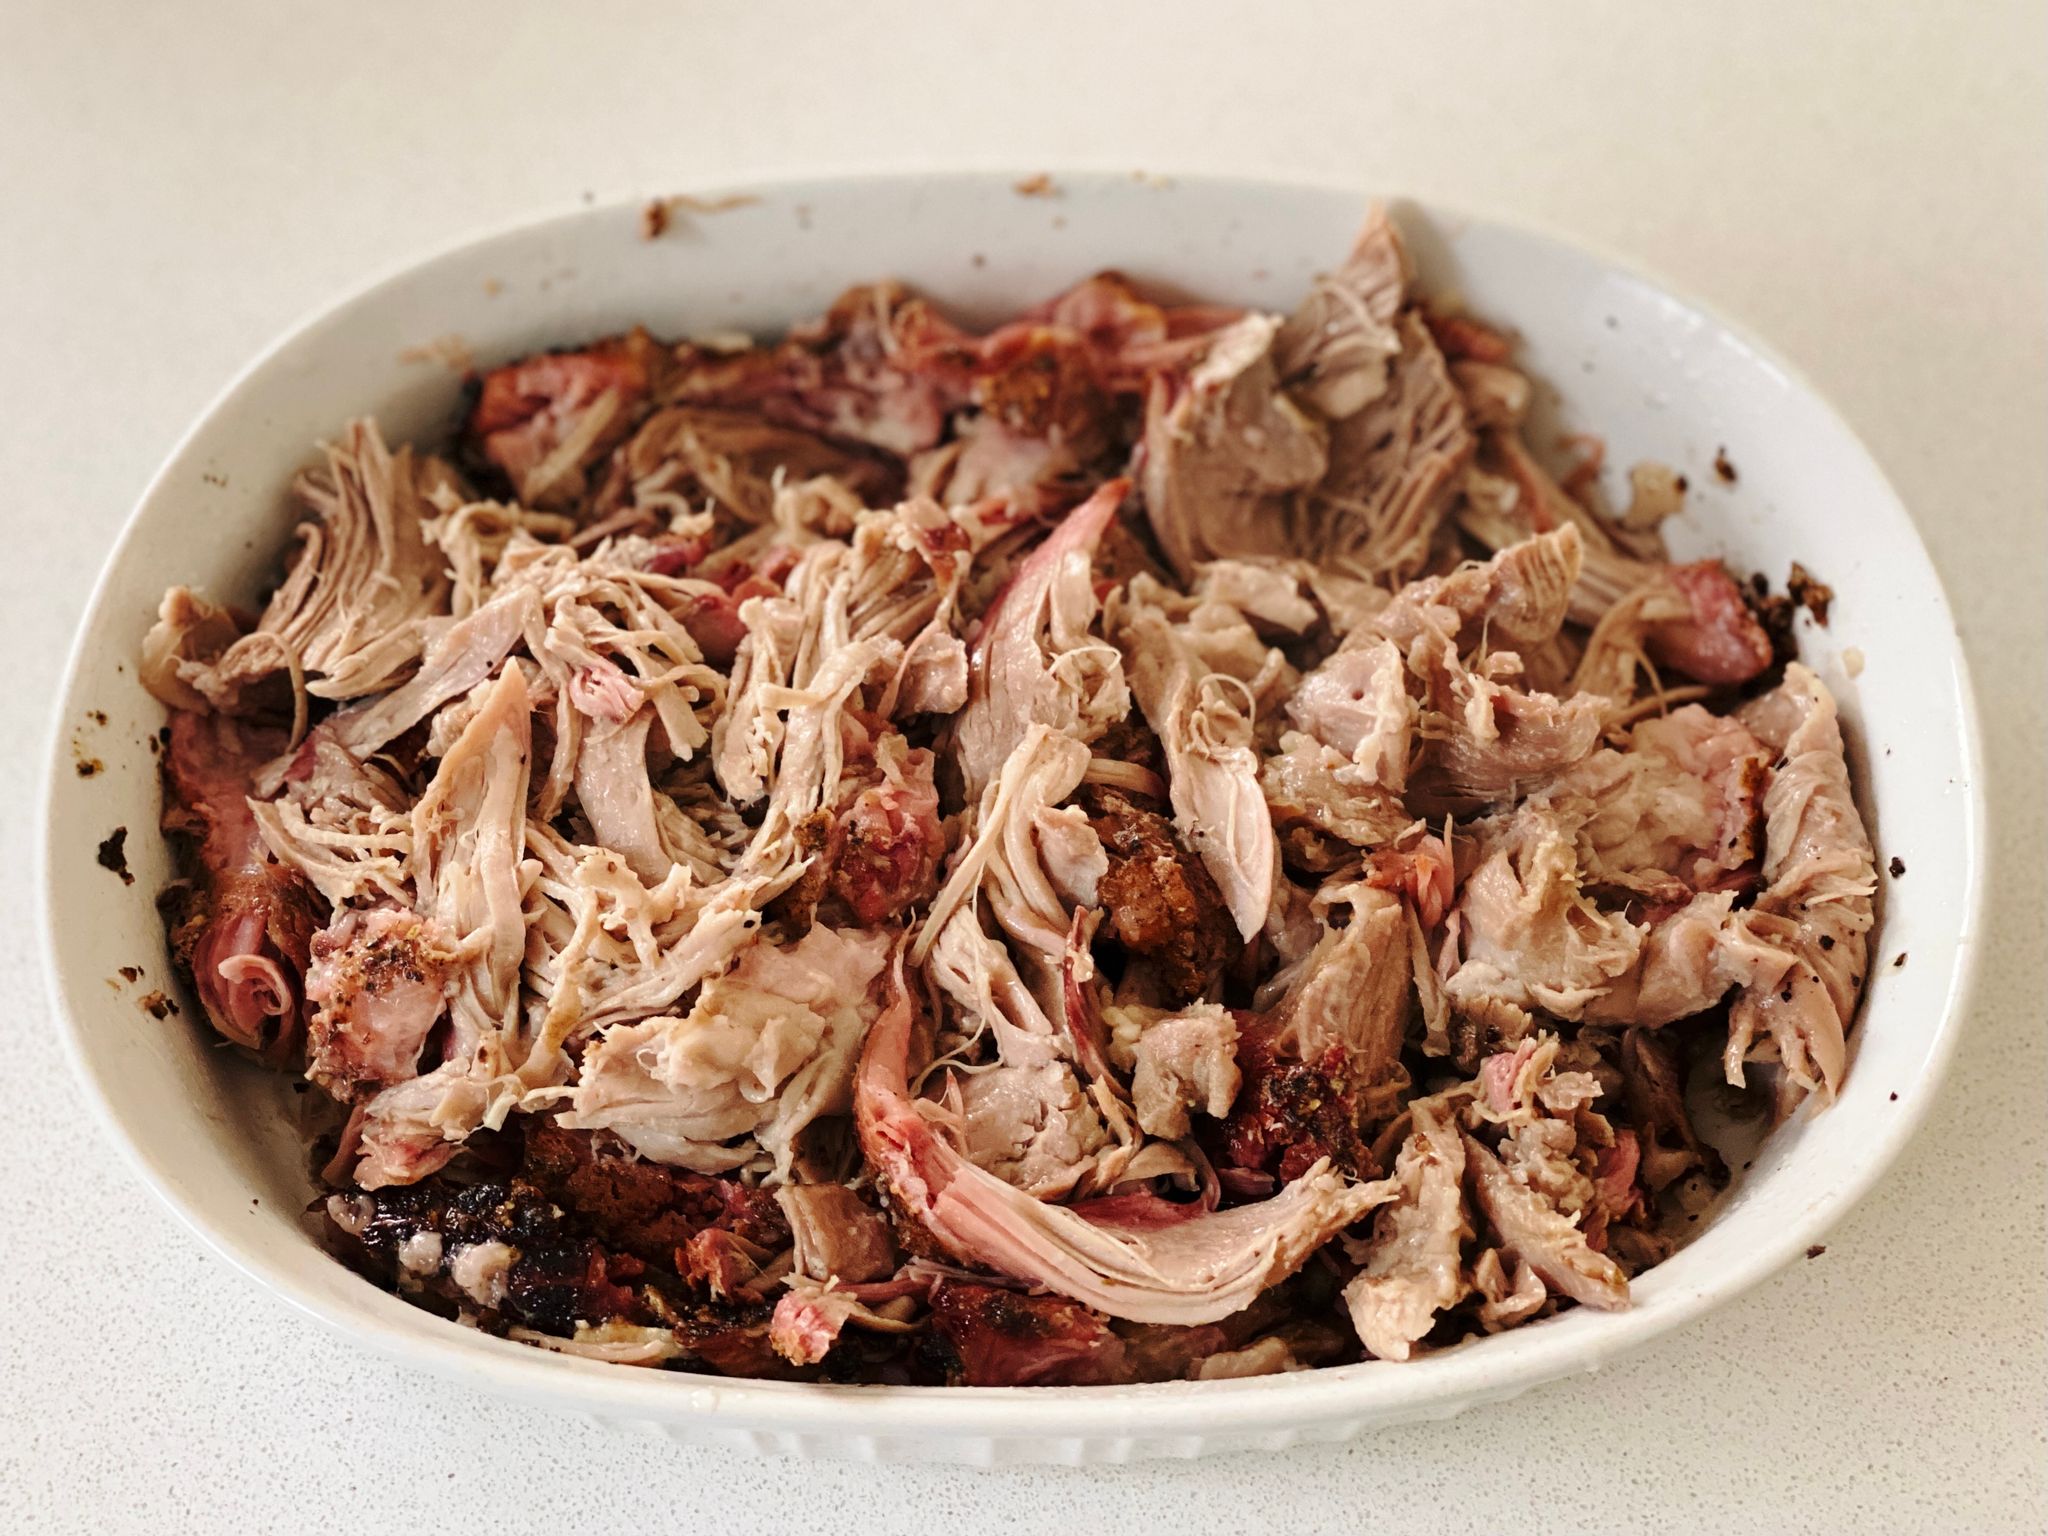 A photo of the finished smoked pulled pork. Did I mention it was epic? Because it was epic.